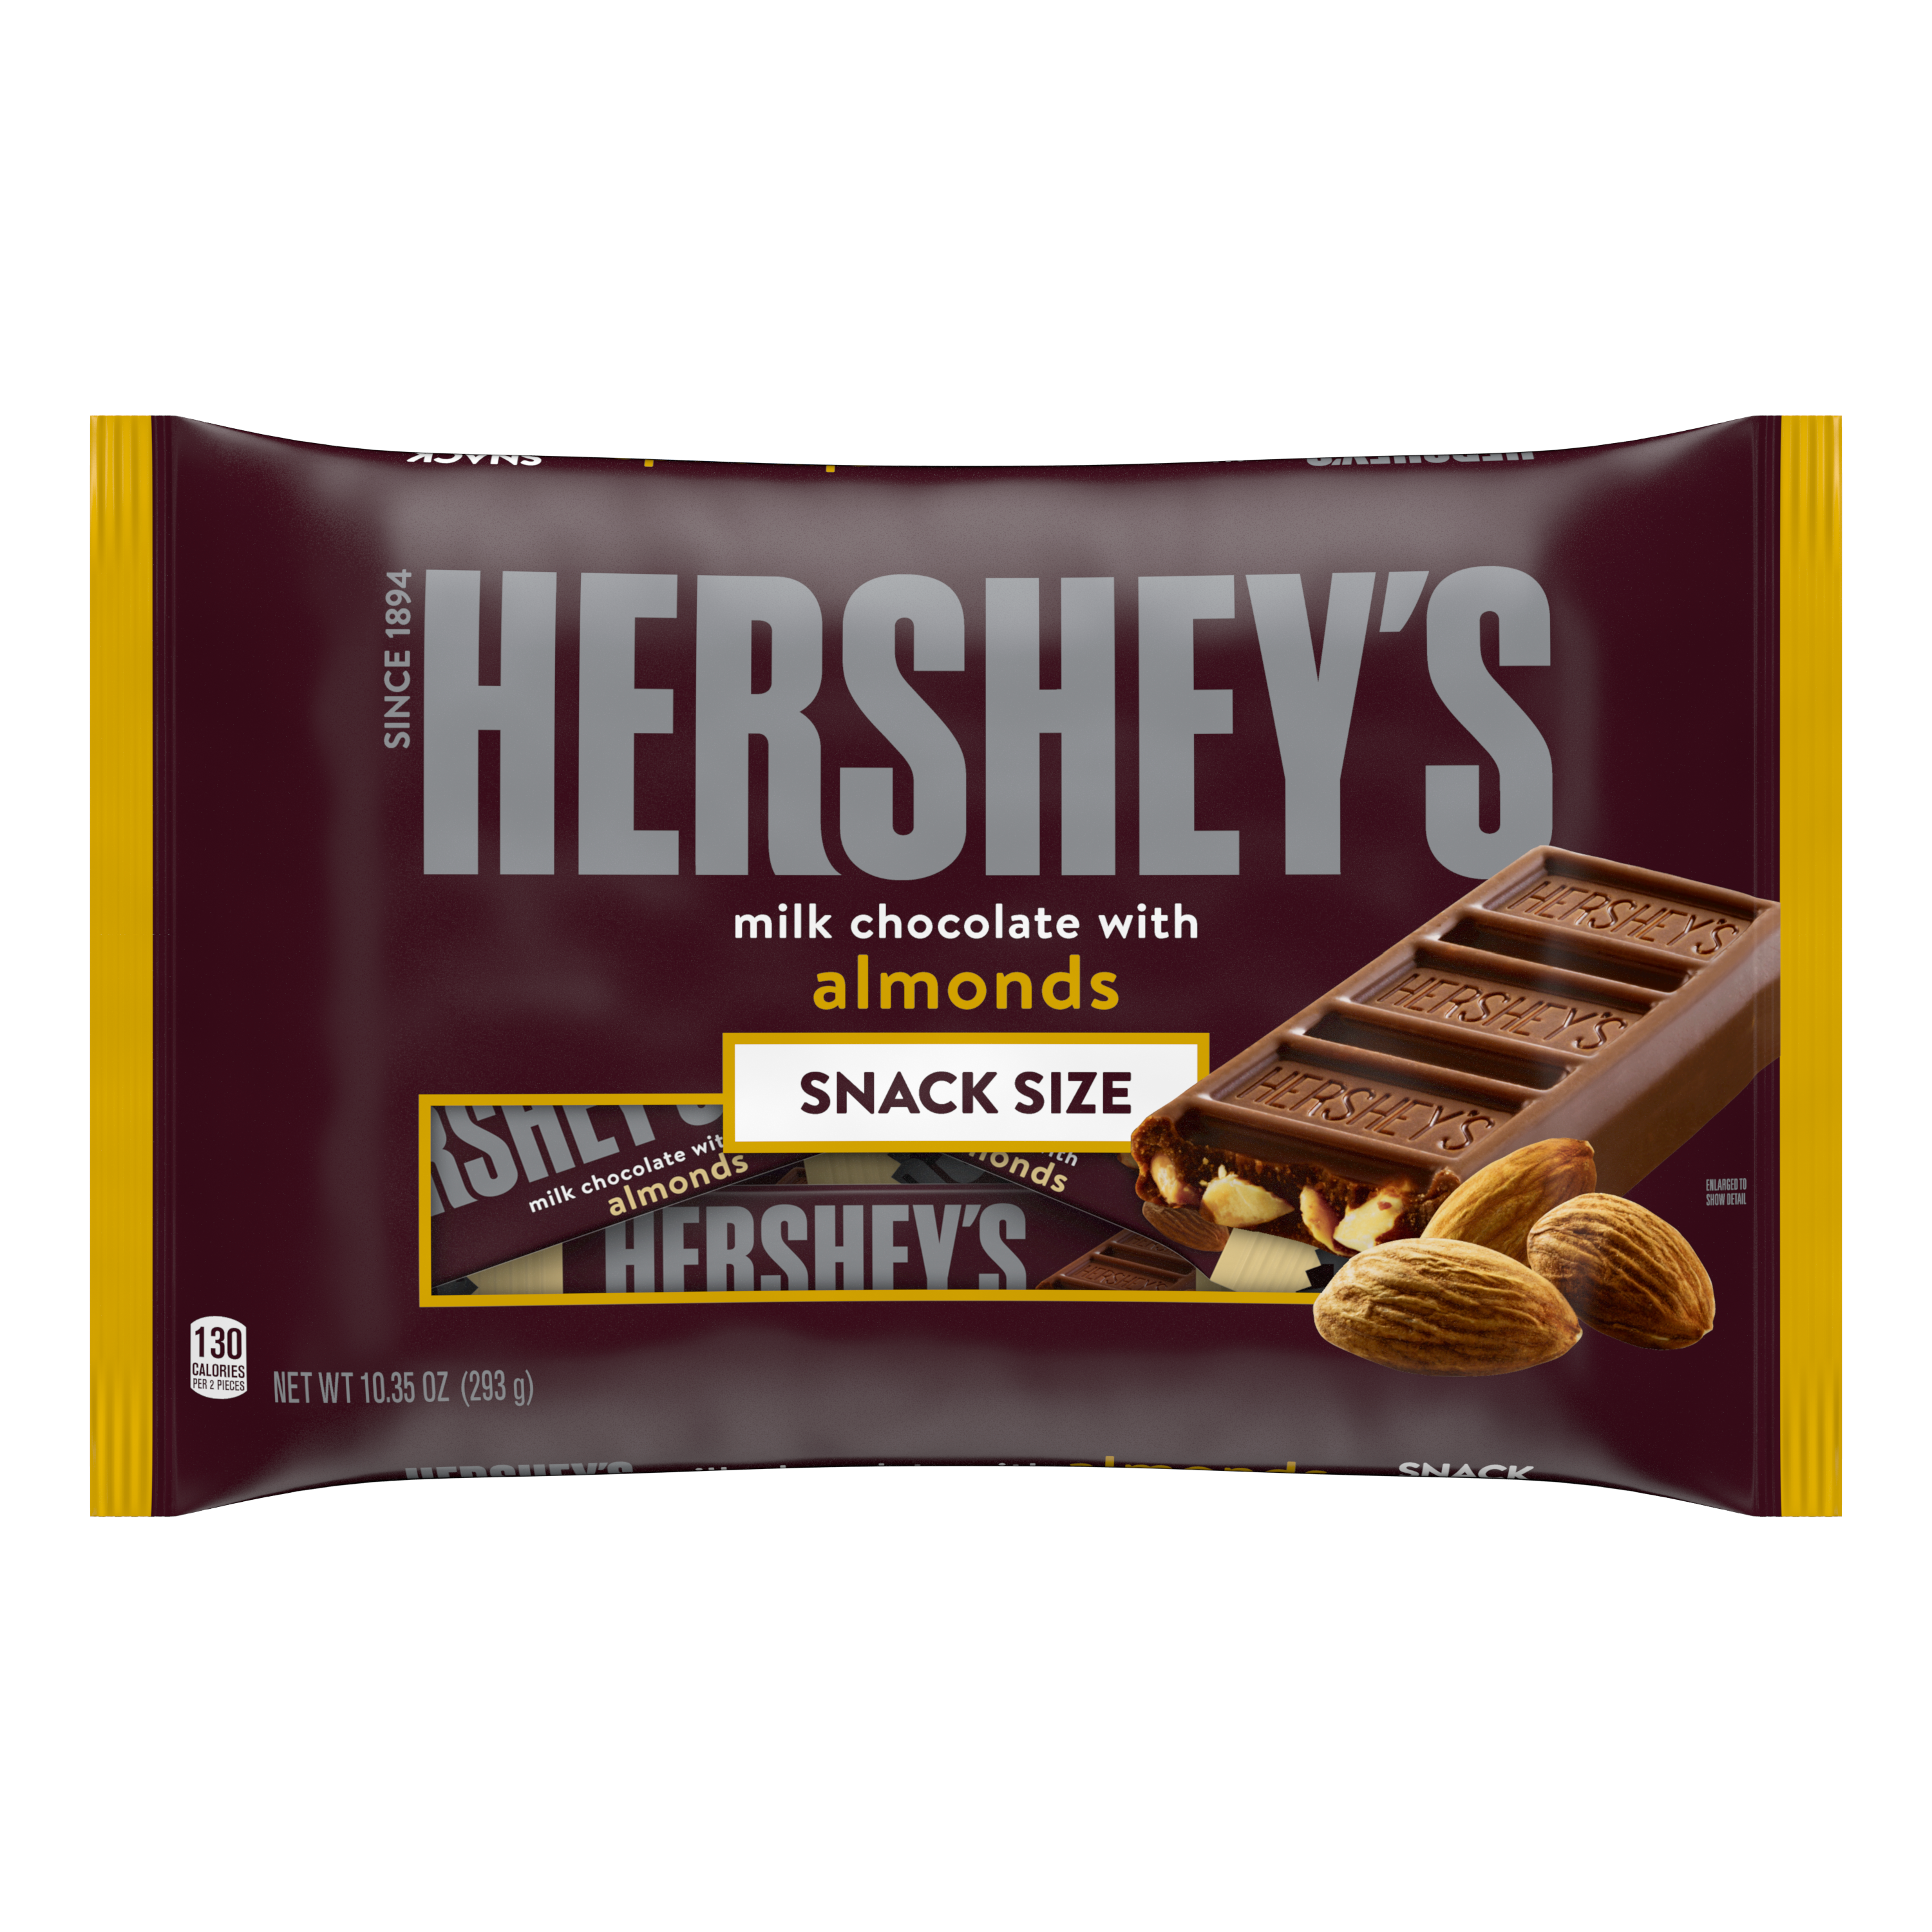 HERSHEY'S Milk Chocolate with Almonds Snack Size Candy Bars, 10.35 oz bag